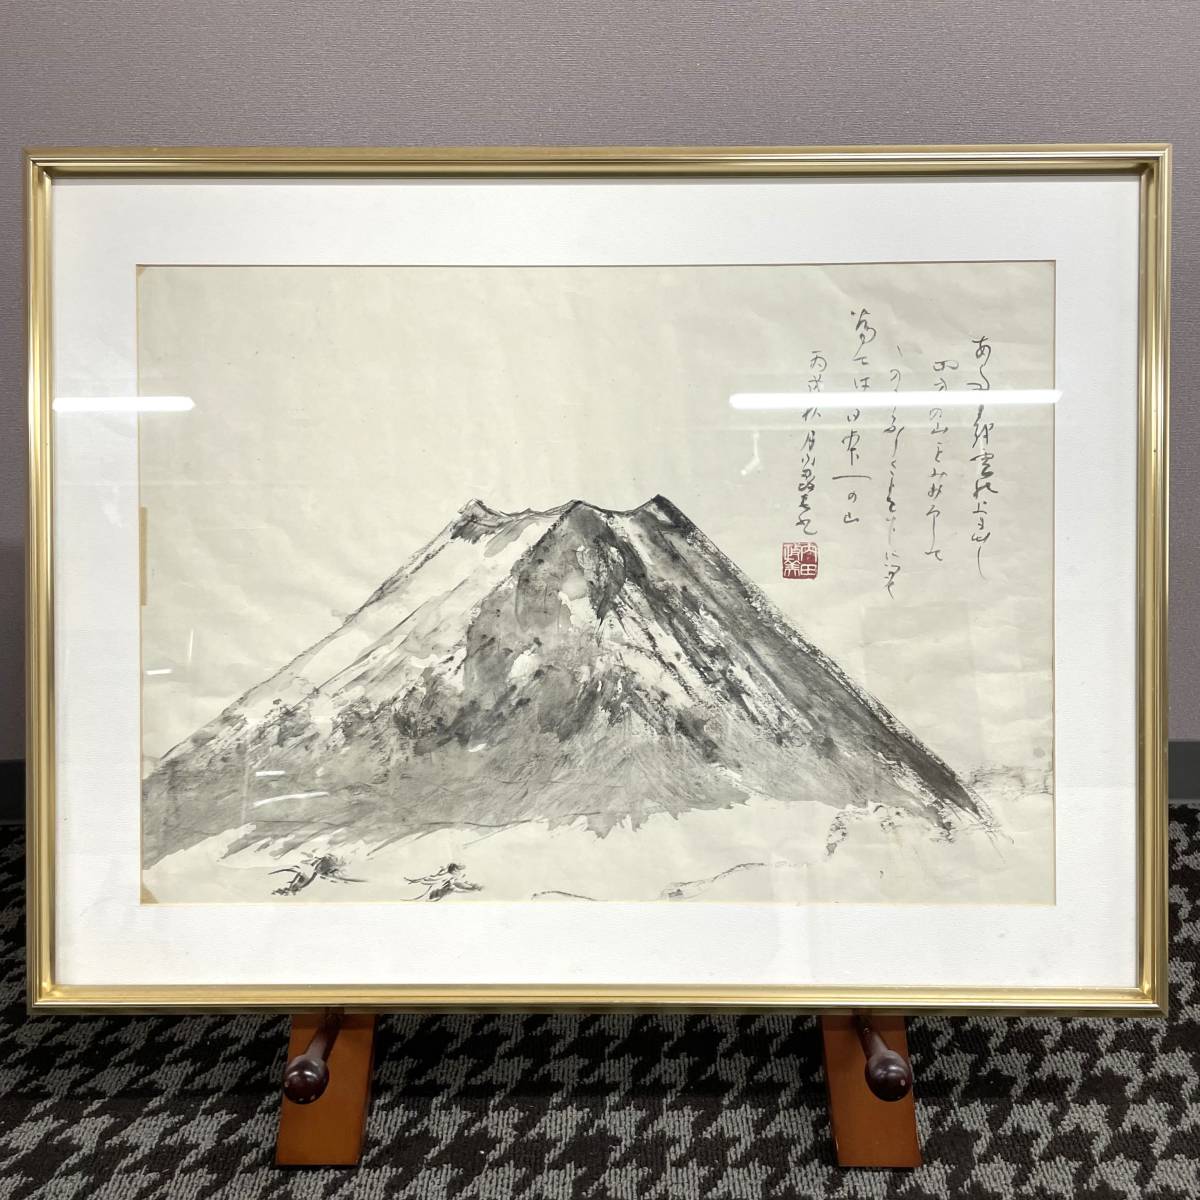 ★Closing sale! ★1 yen sold out! ★Bundled shipping possible ★Japanese painting ★Mt. Fuji ★Framed ★Calligraphy ★63×48 ★Author unknown, painting, Japanese painting, landscape, Fugetsu